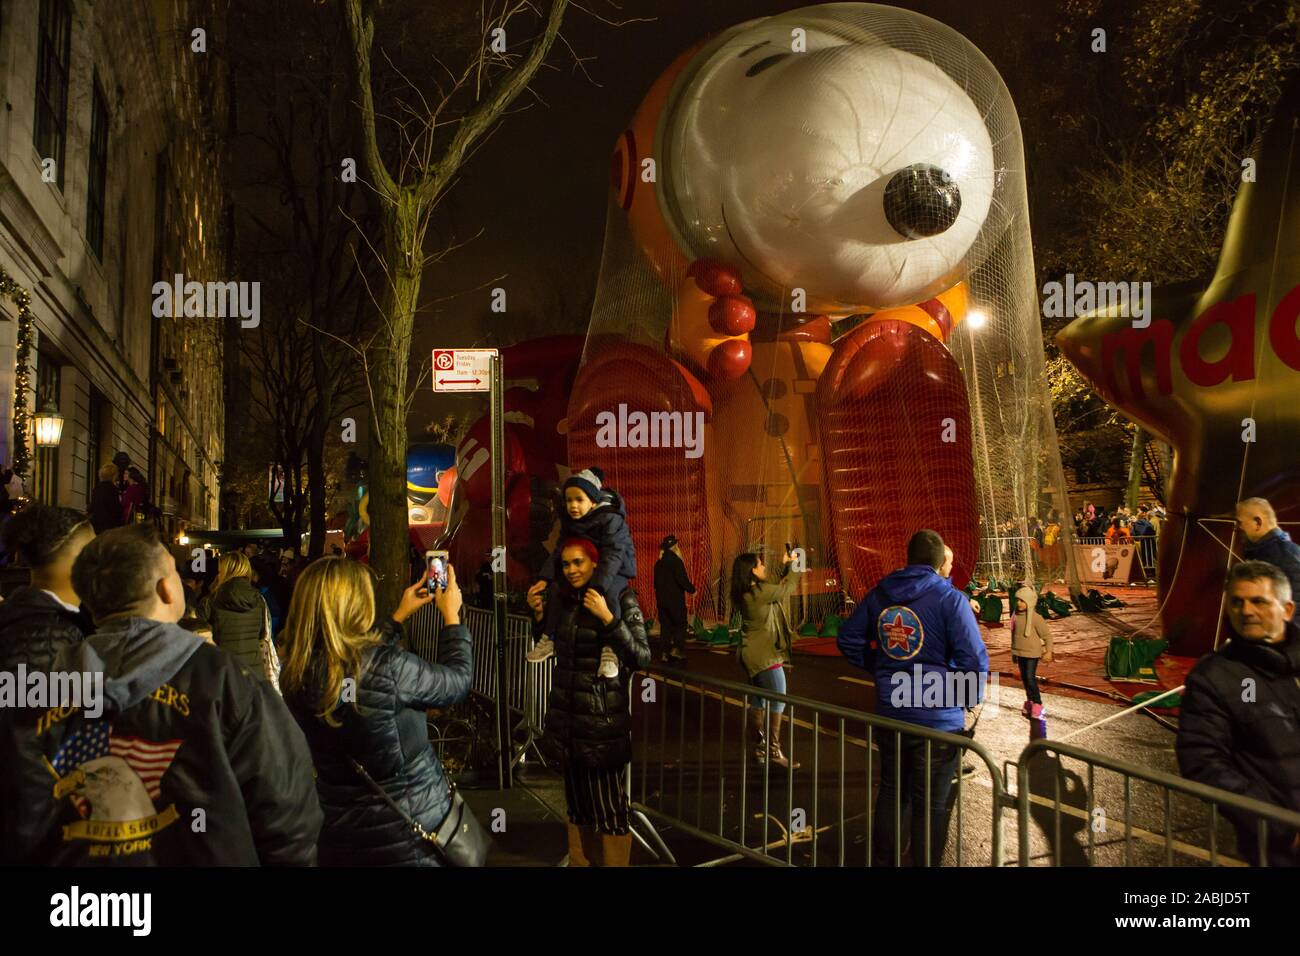 New York, NY, USA. 27th Nov, 2019. Thousands of spectators packed the streets around the American Museum of Natural History to see the inflation area for the balloons for Macy's Thanksgiving Day Parade. A family pauses for photos, with Astronaut Snoopy in the background., Credit: Ed Lefkowicz/Alamy Live News Stock Photo